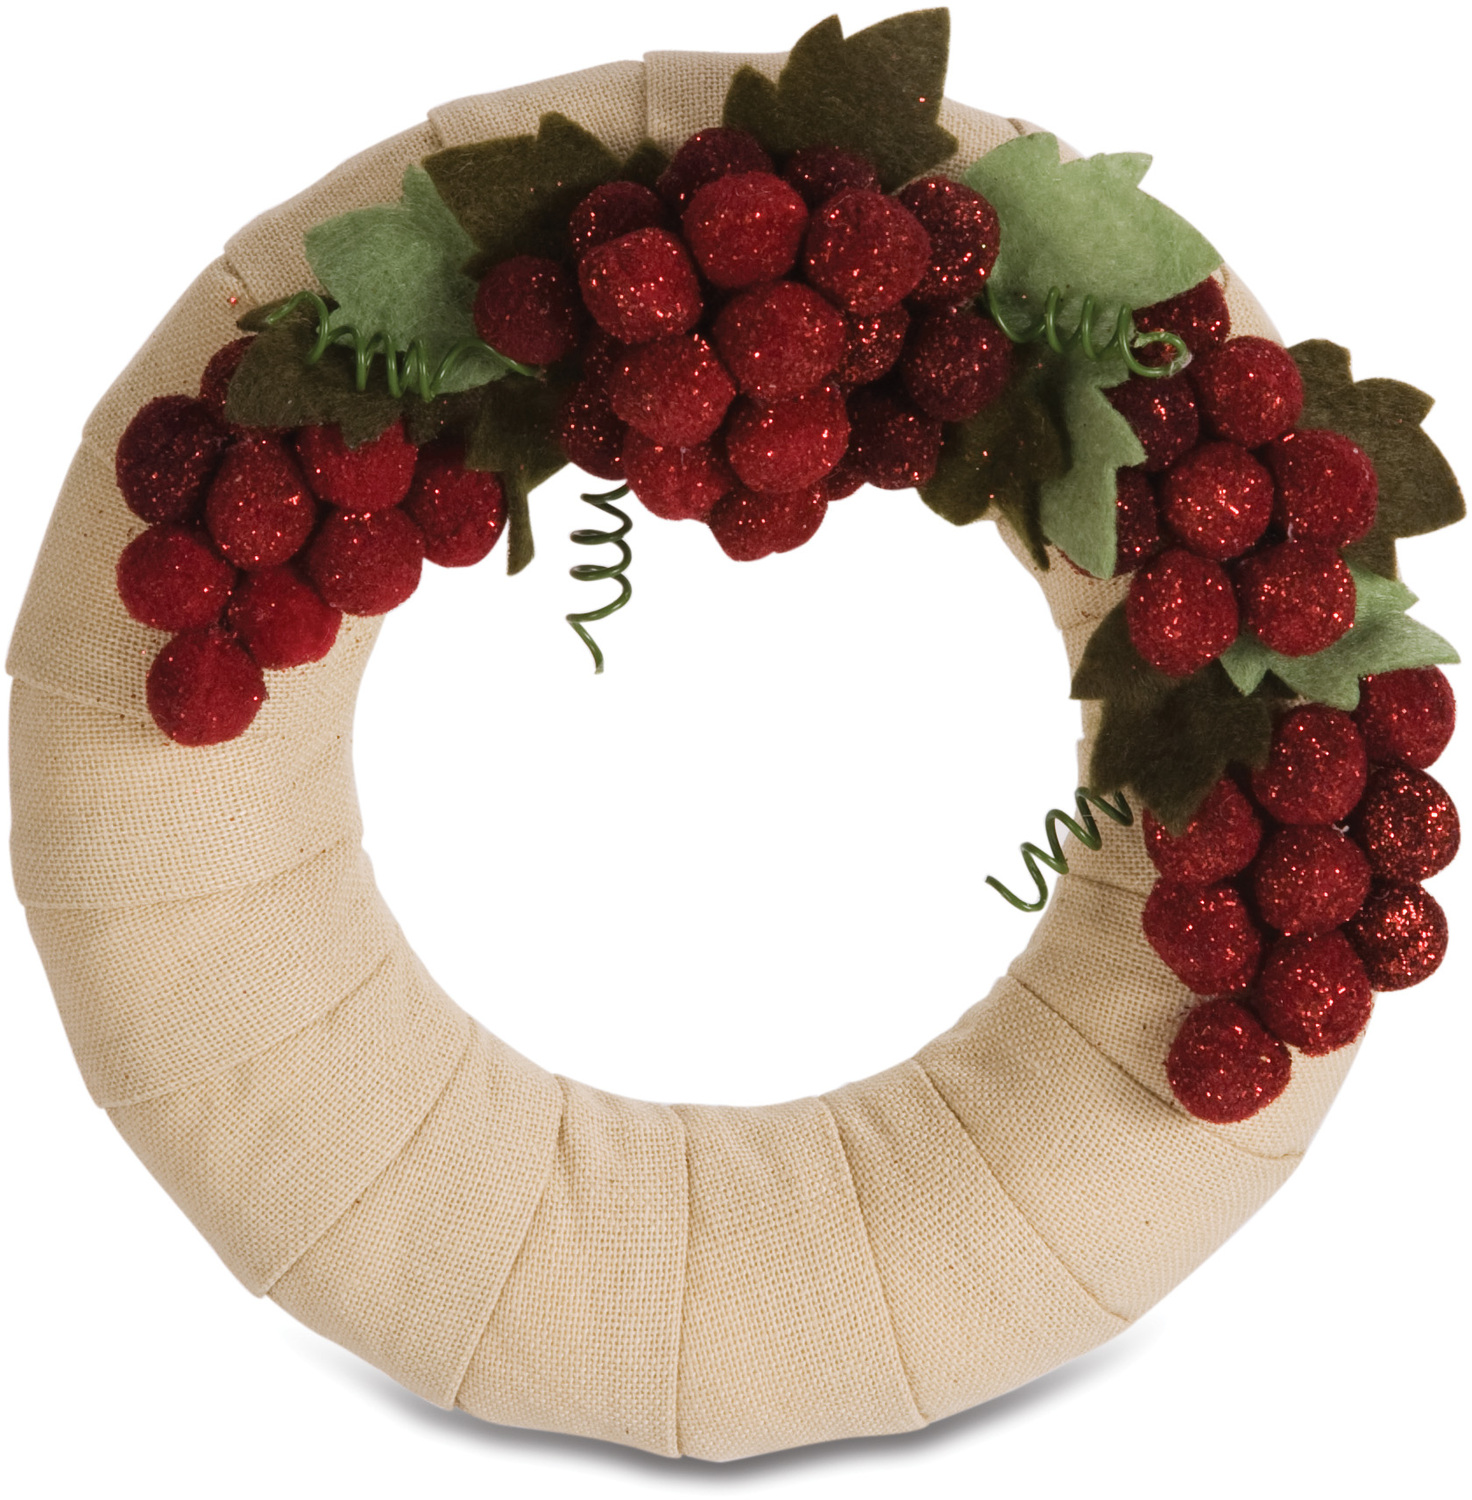 Napa Valley by Signs of Happiness - Napa Valley - 6" Wreath